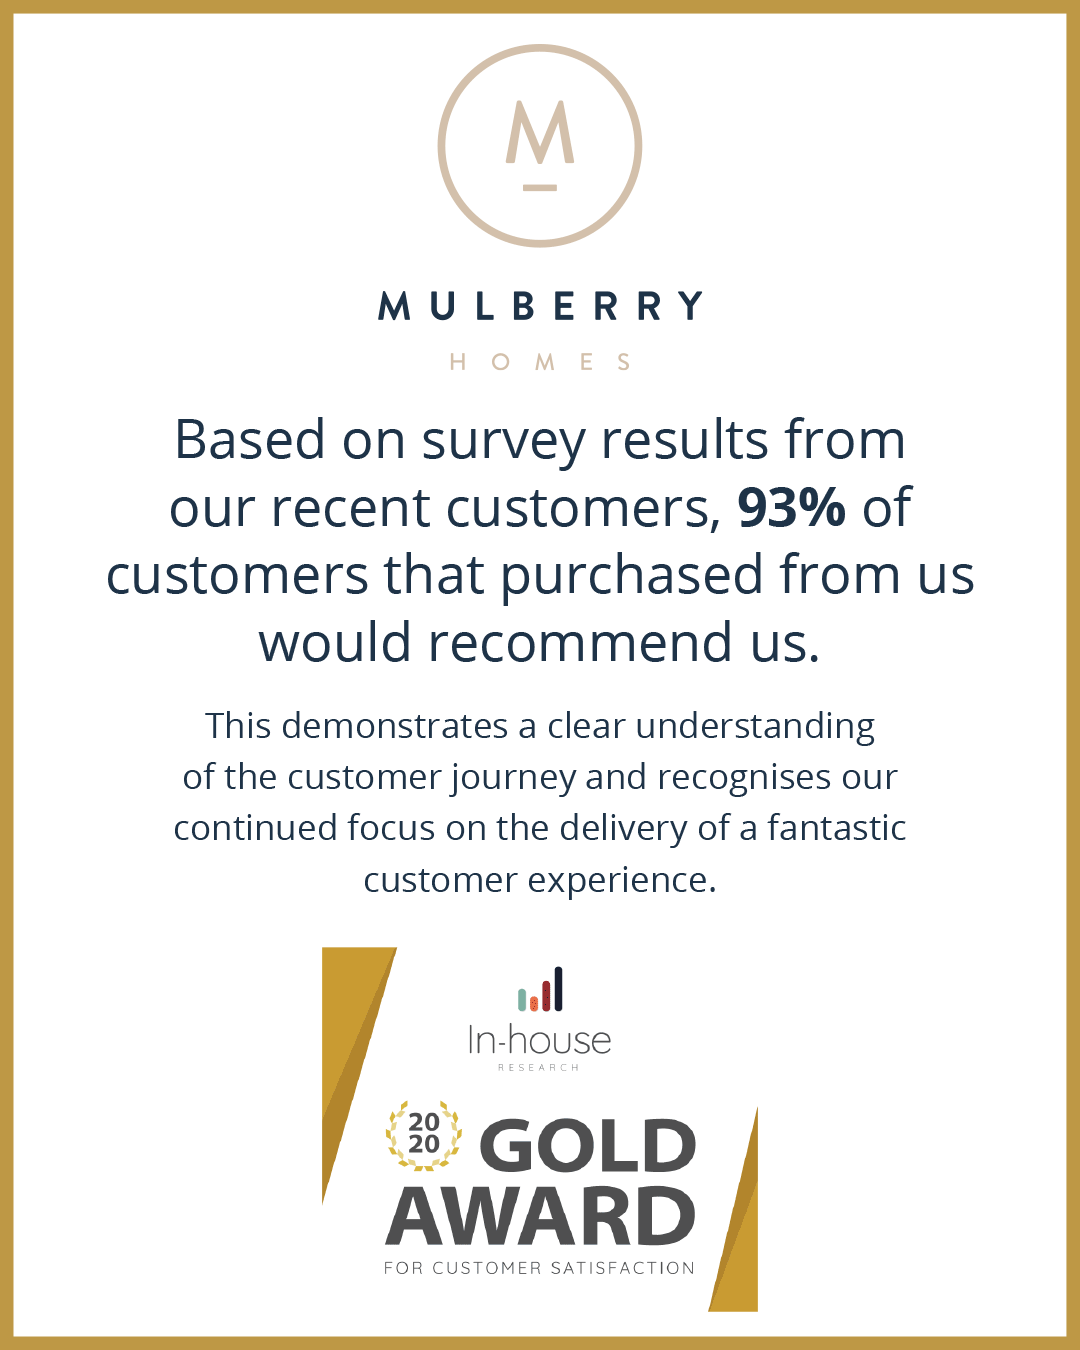 Mulberry Homes achieves a Gold Award for customer satisfaction for the ...